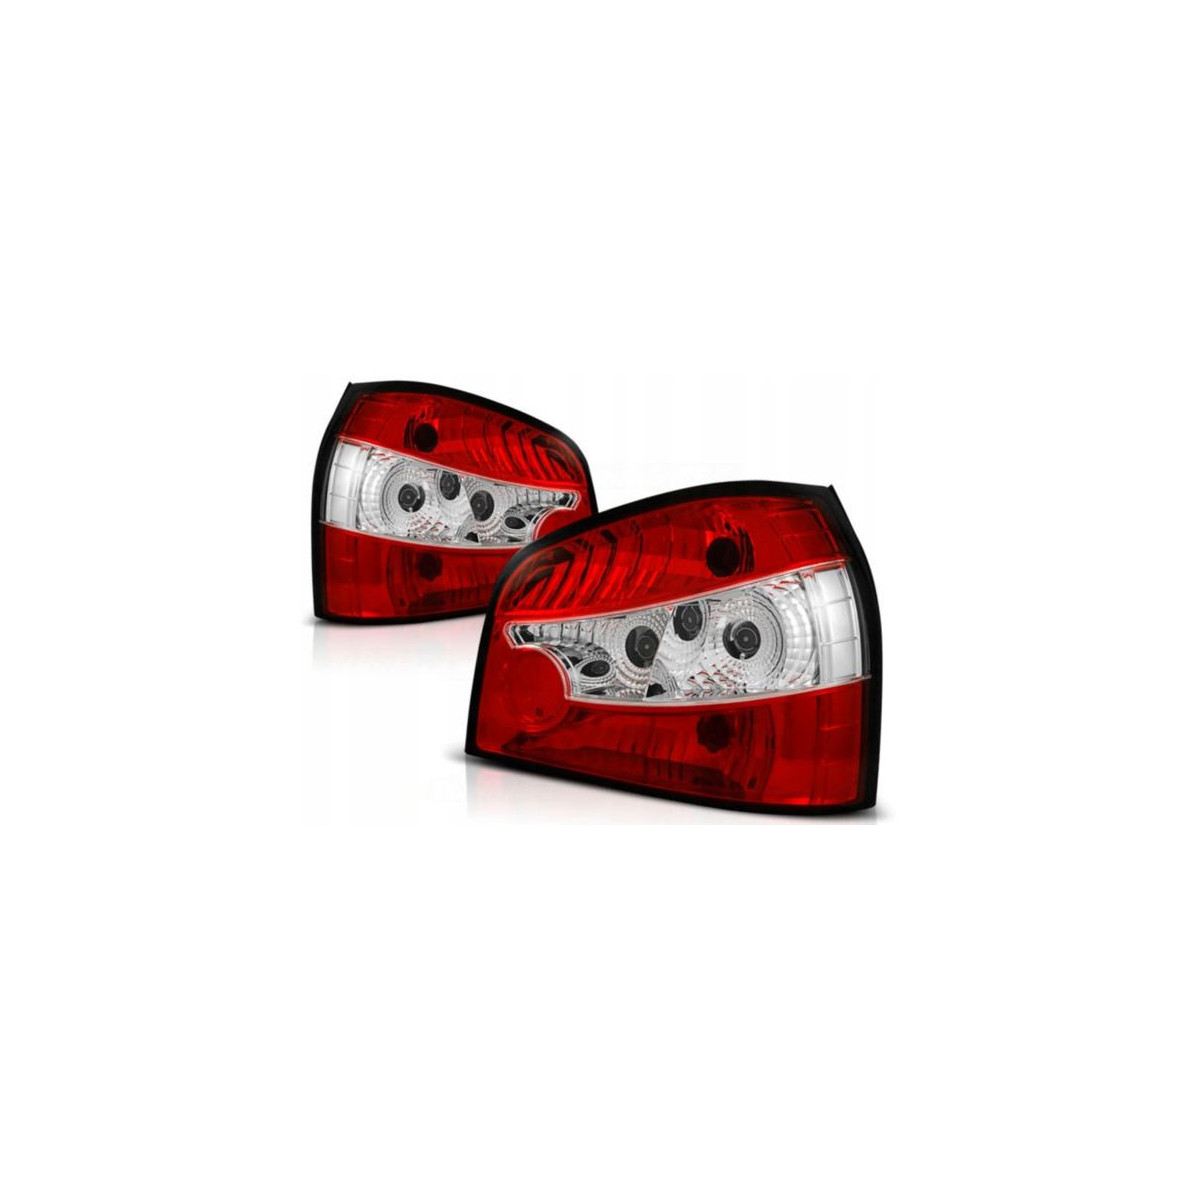 LAMPY TYLNE NOWE AUDI A3 8L 96-00 CLEAR RED WHITE